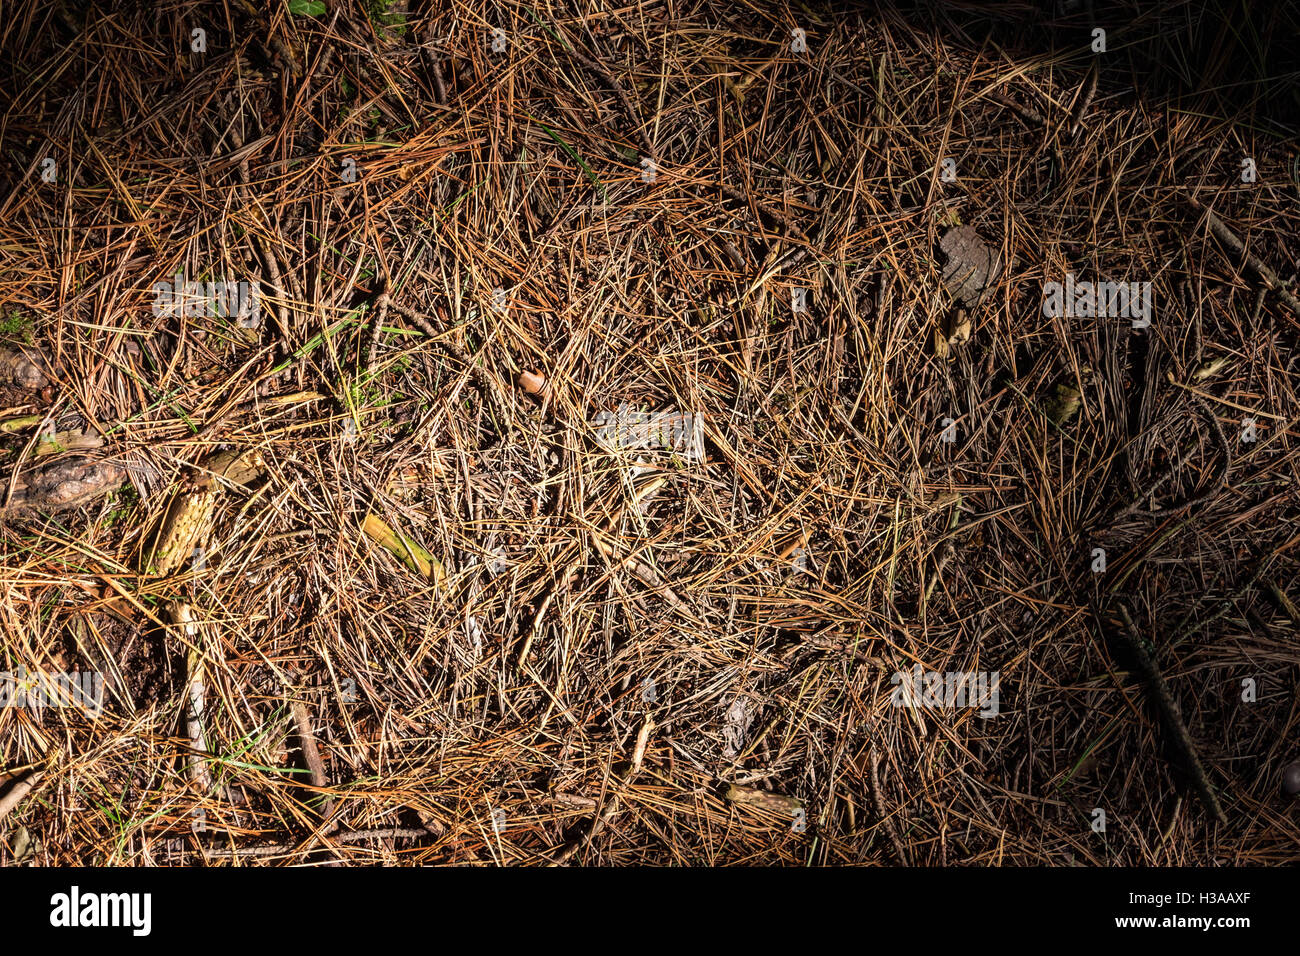 Forest floor covered with pine needles Stock Photo